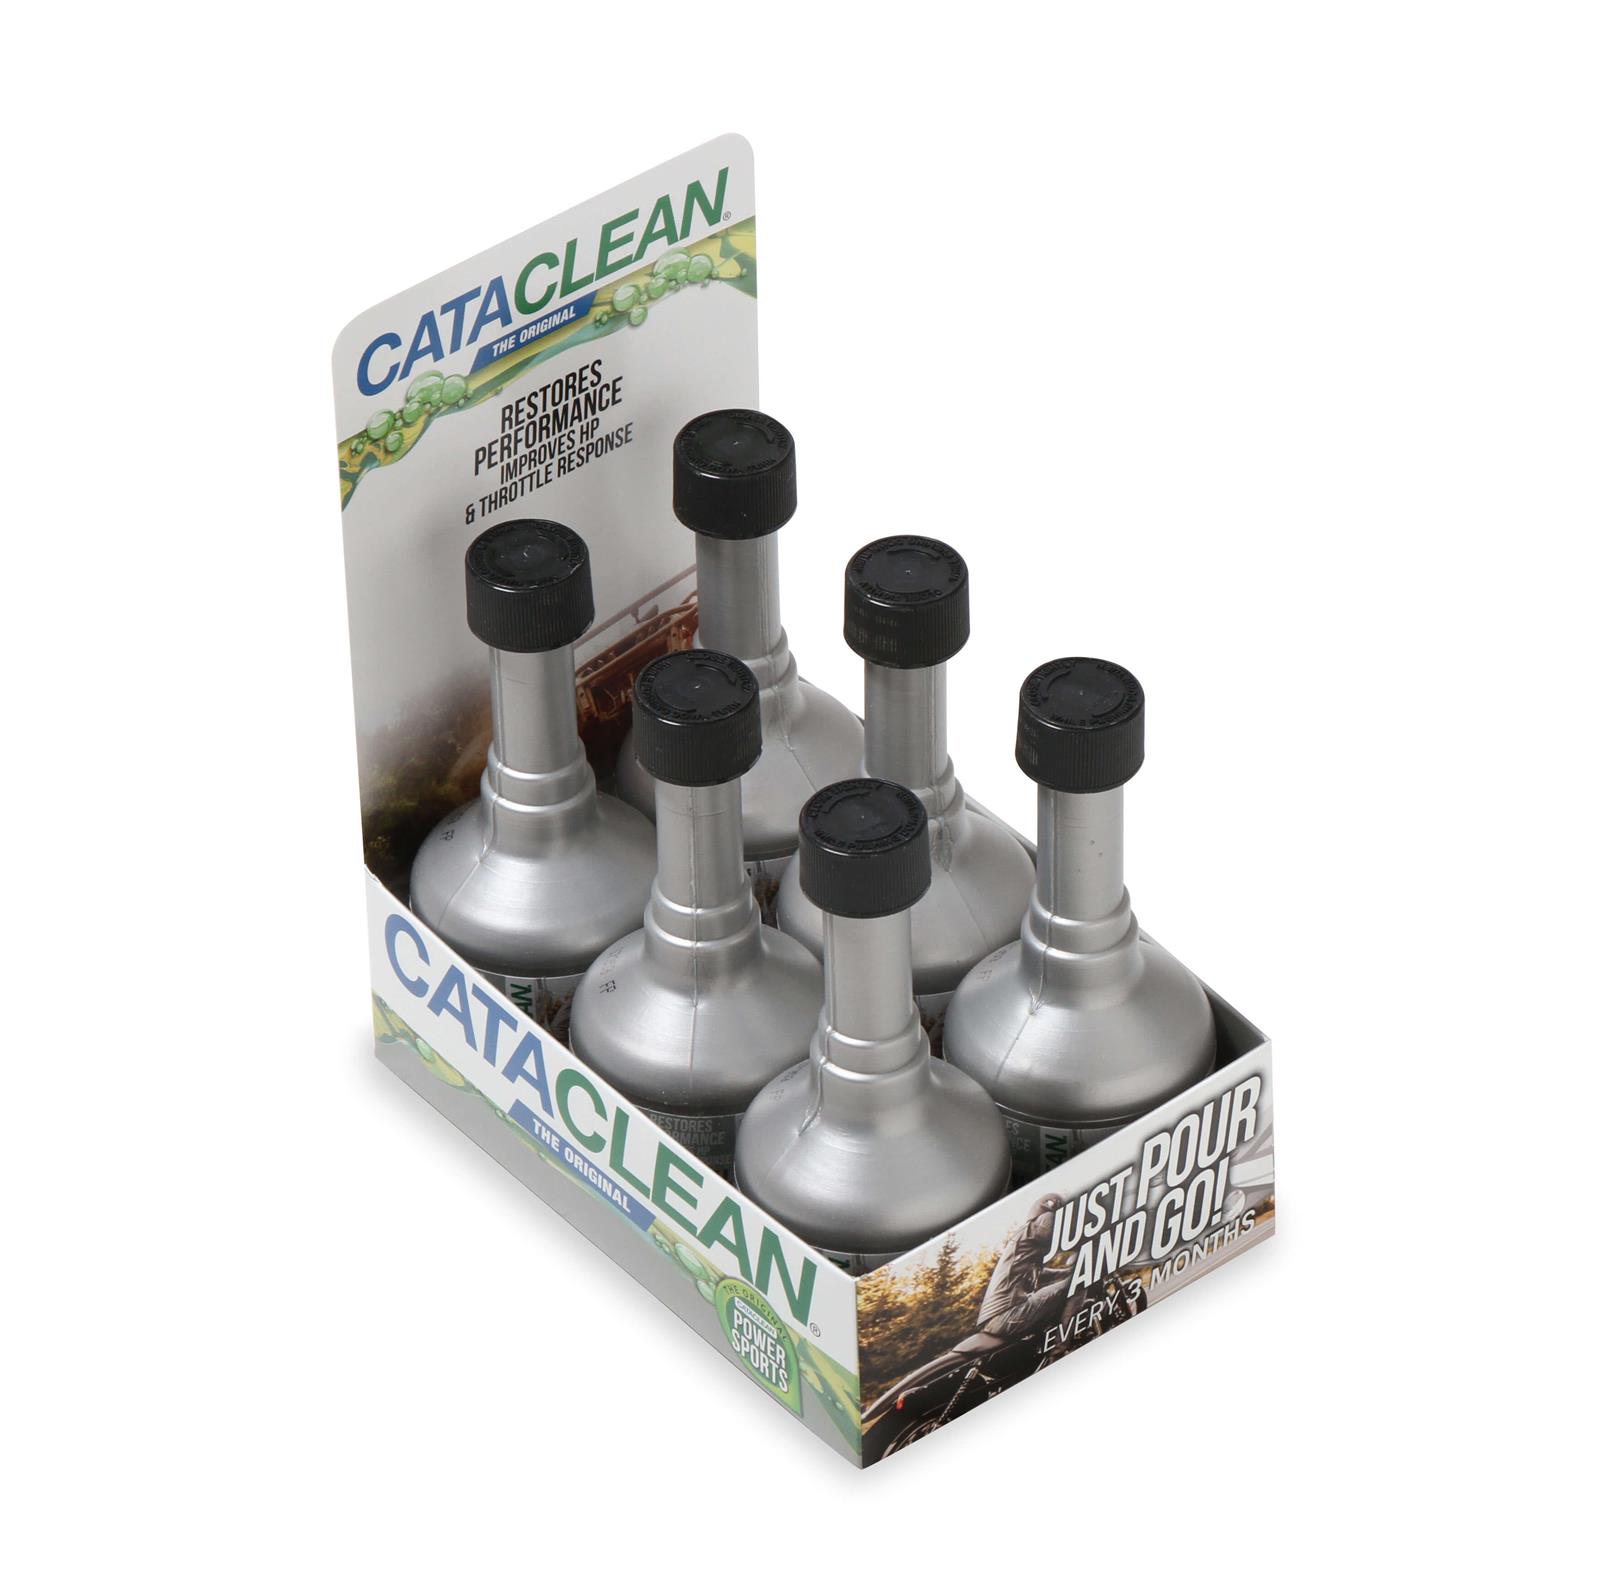 What makes Cataclean different to other fuel additives?